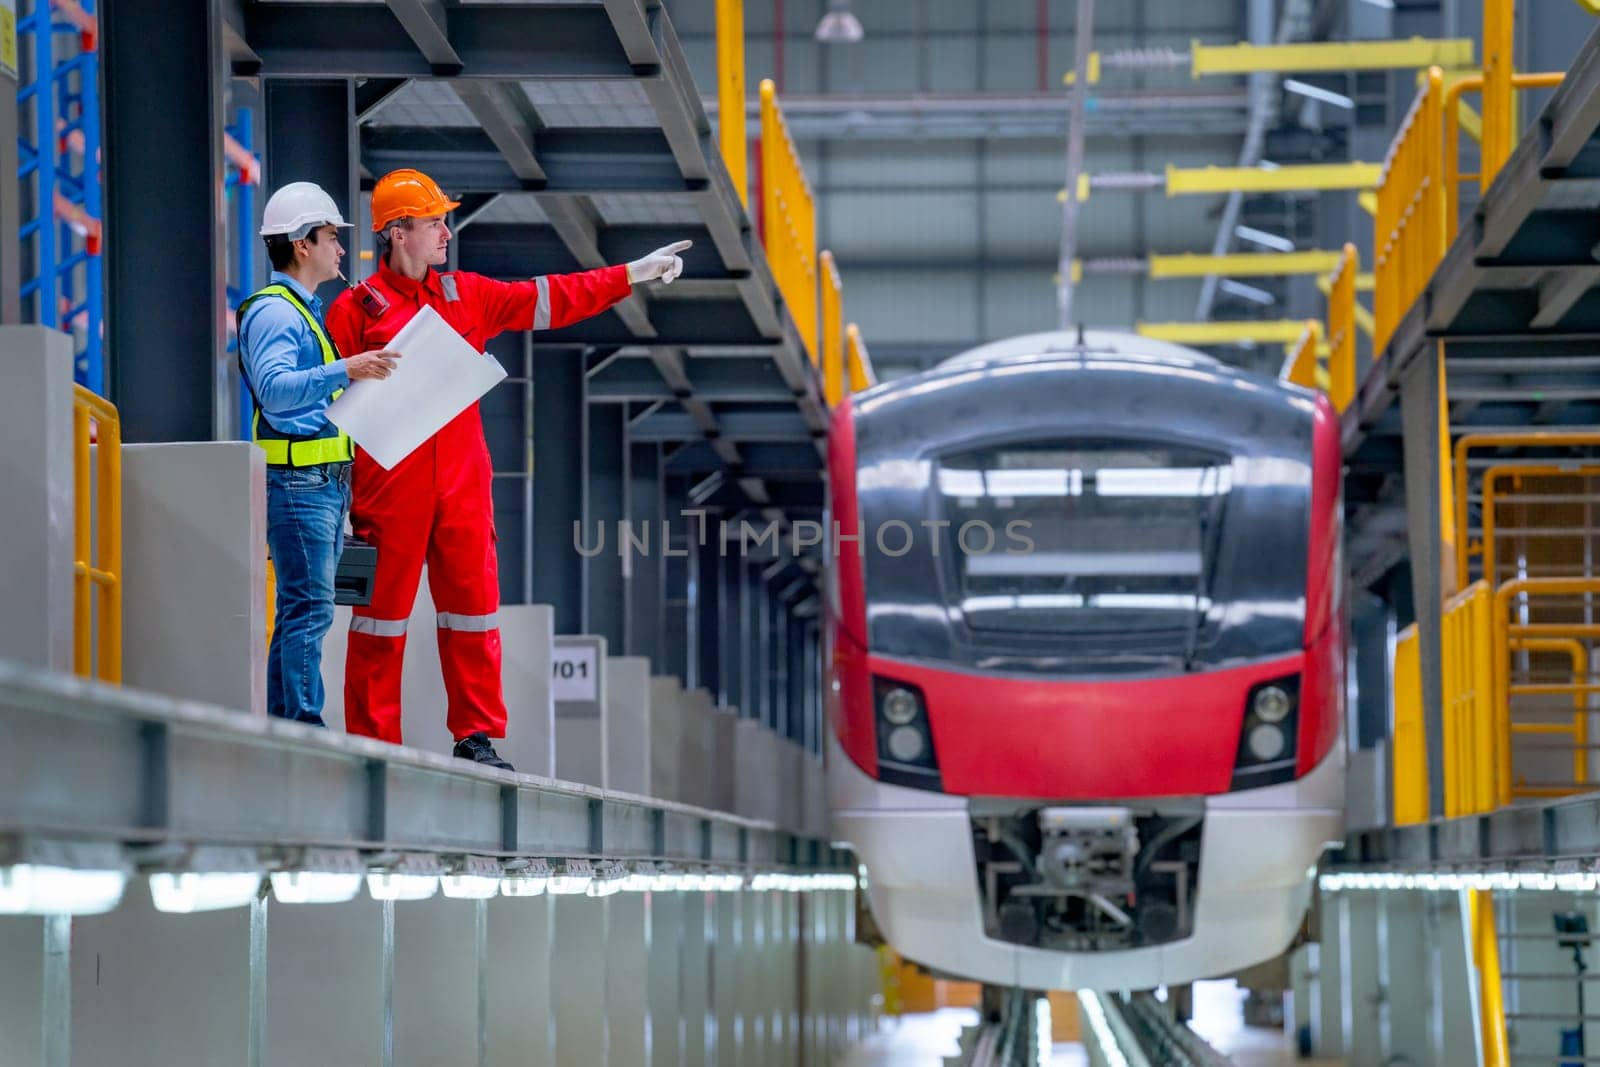 Professional technician point to right direction and discuss with engineer near railroad tracks of electrical or sky train in factory workplace.